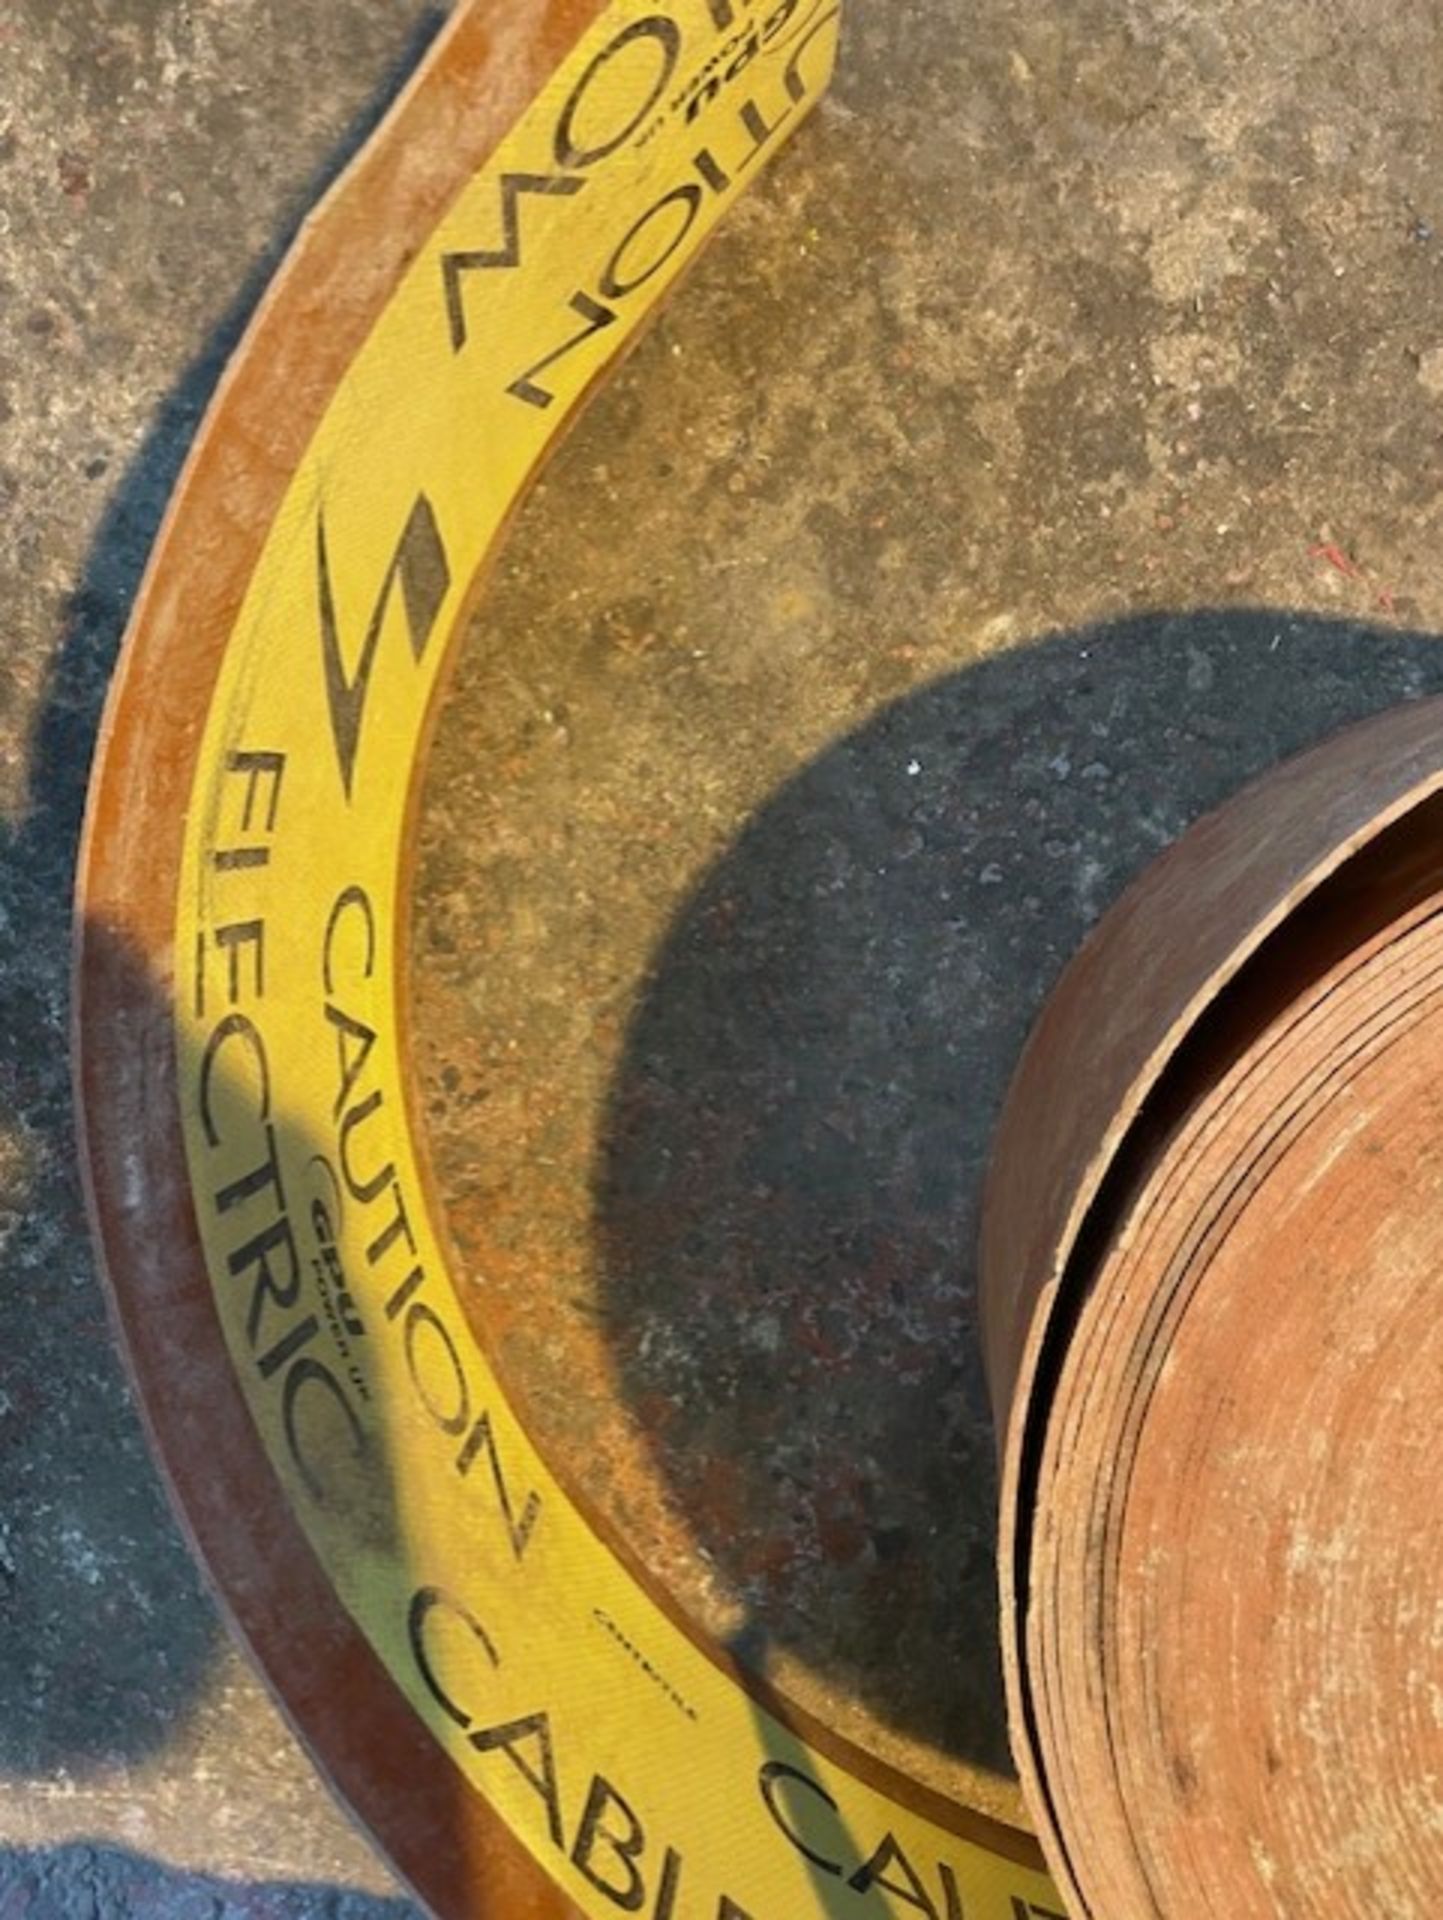 Electric cable warning tape from national grid at least 50 metres left - Image 3 of 4